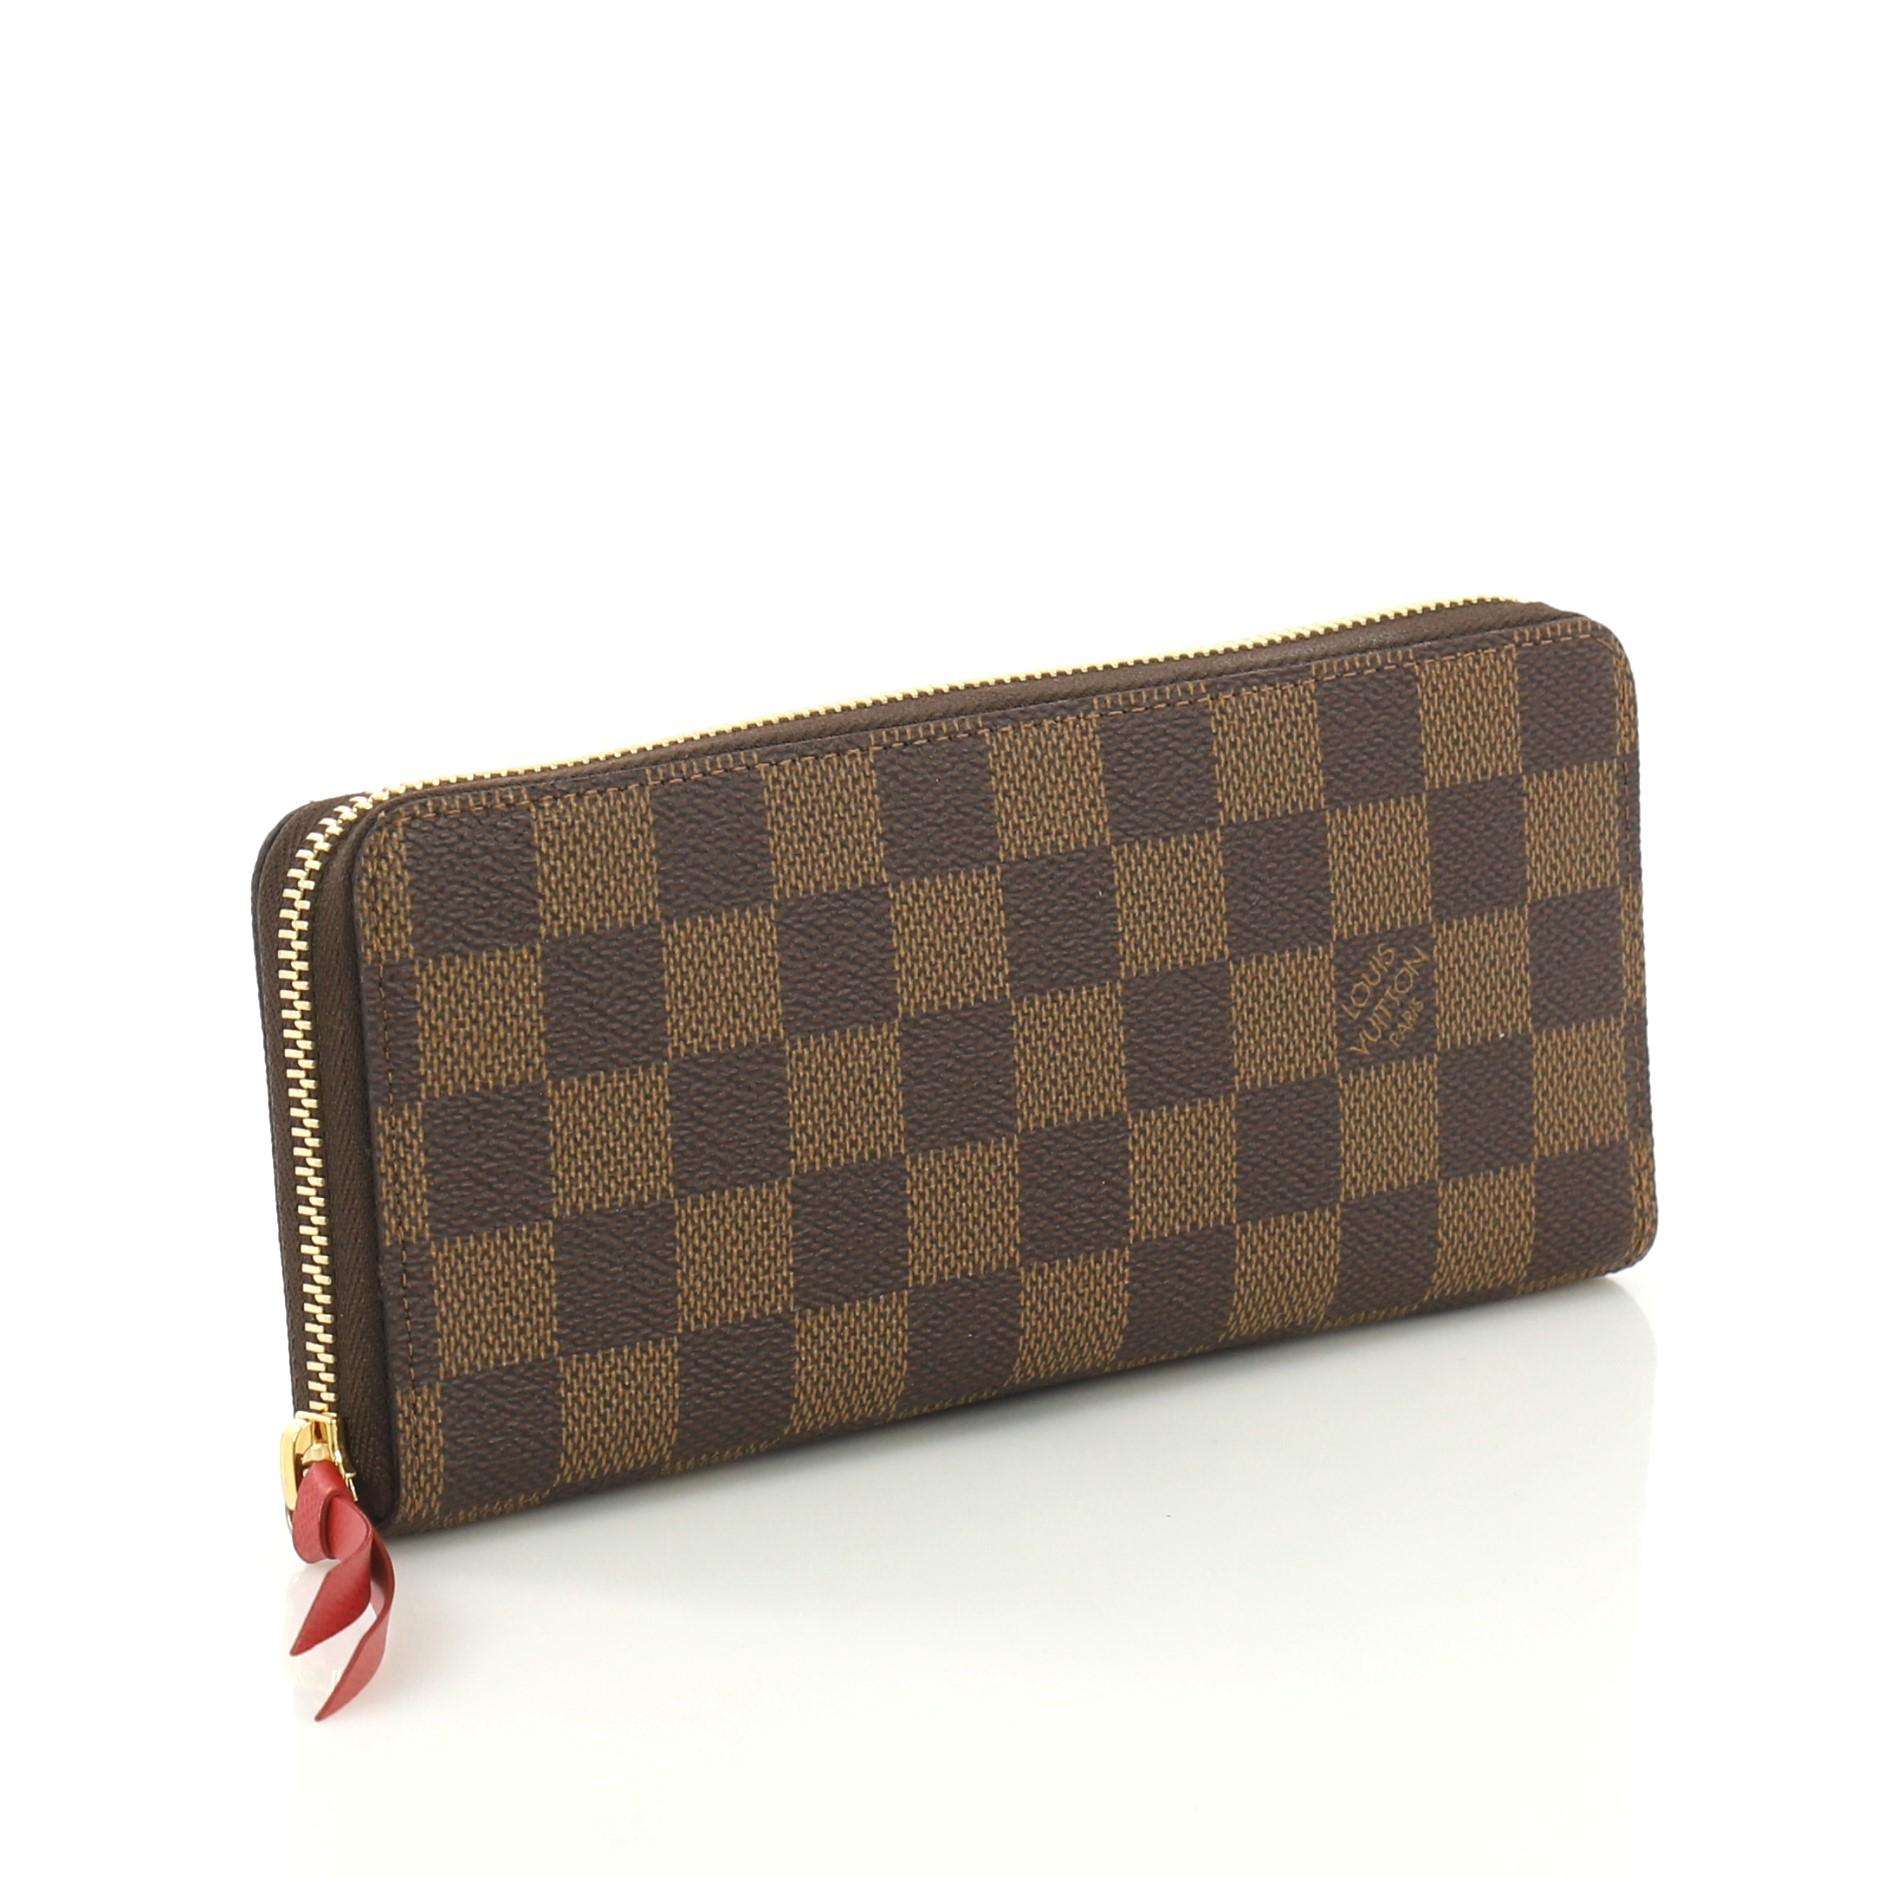 This Louis Vuitton Clemence Wallet Damier, crafted from damier ebene coated canvas, features gold-tone hardware. Its all-around zip closure opens to a red leather interior with multiple card slots, slip pockets, gusseted compartments and middle zip